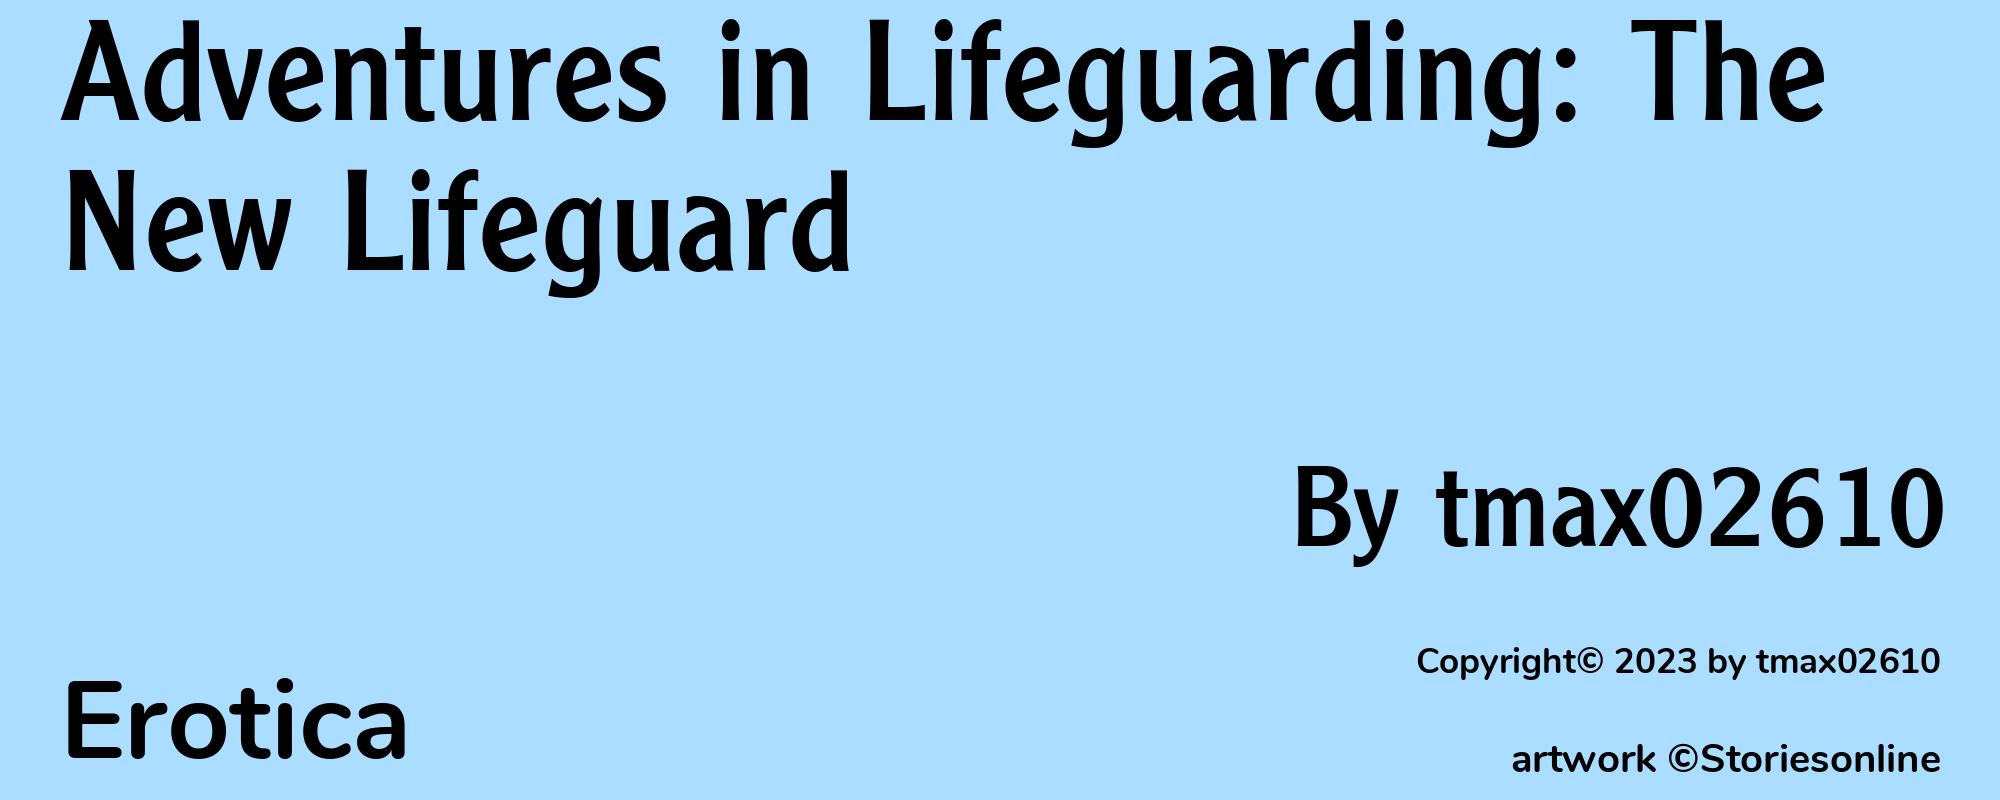 Adventures in Lifeguarding: The New Lifeguard - Cover